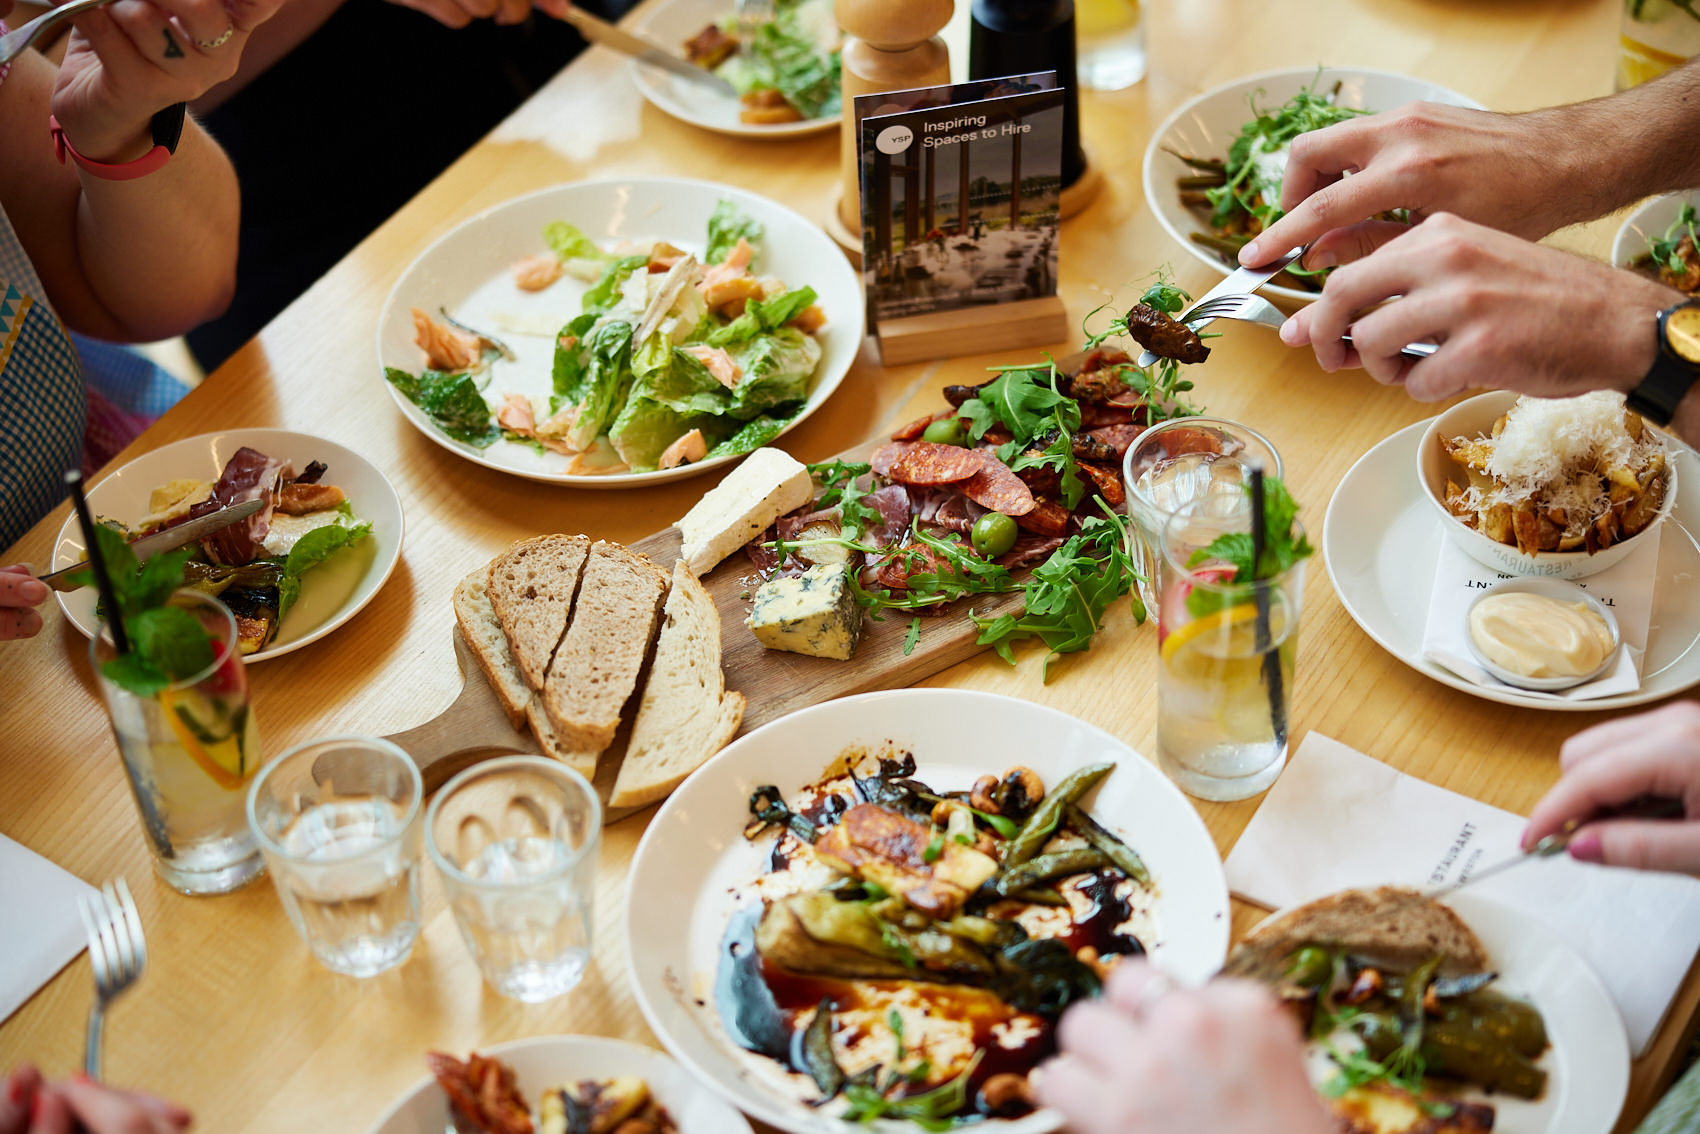 A table filled with small plates of food while hands holding forks reach for the food.